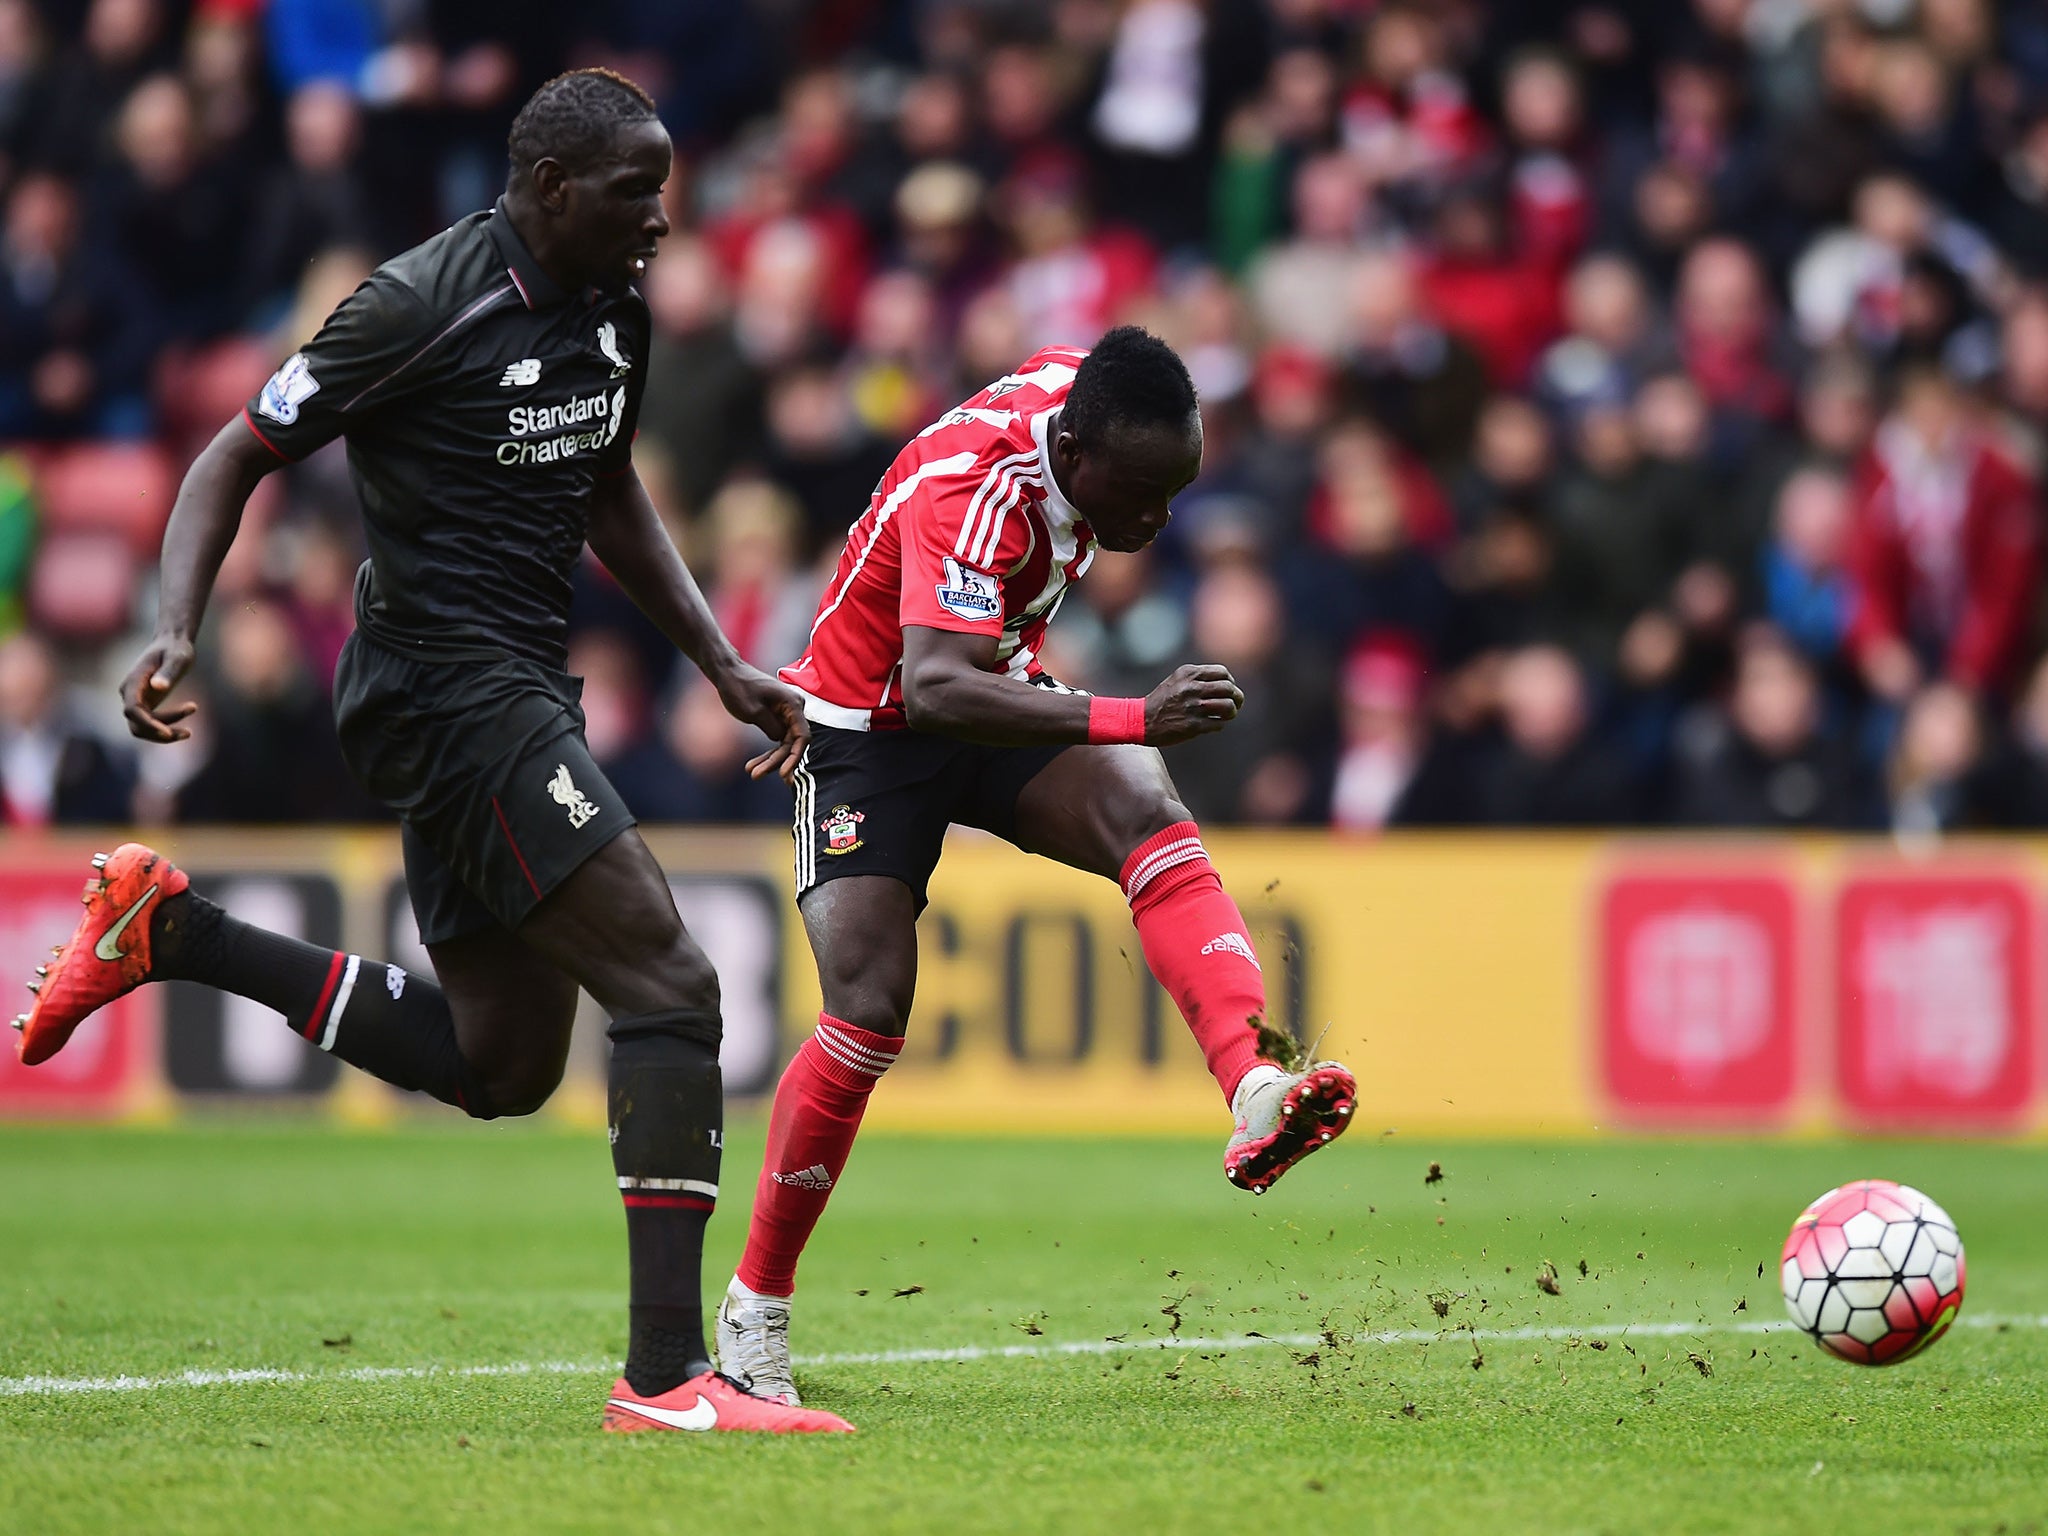 Southampton vs Liverpool match report Sadio Mane inspires Saints to thrilling comeback against Jurgen Klopps Reds The Independent The Independent